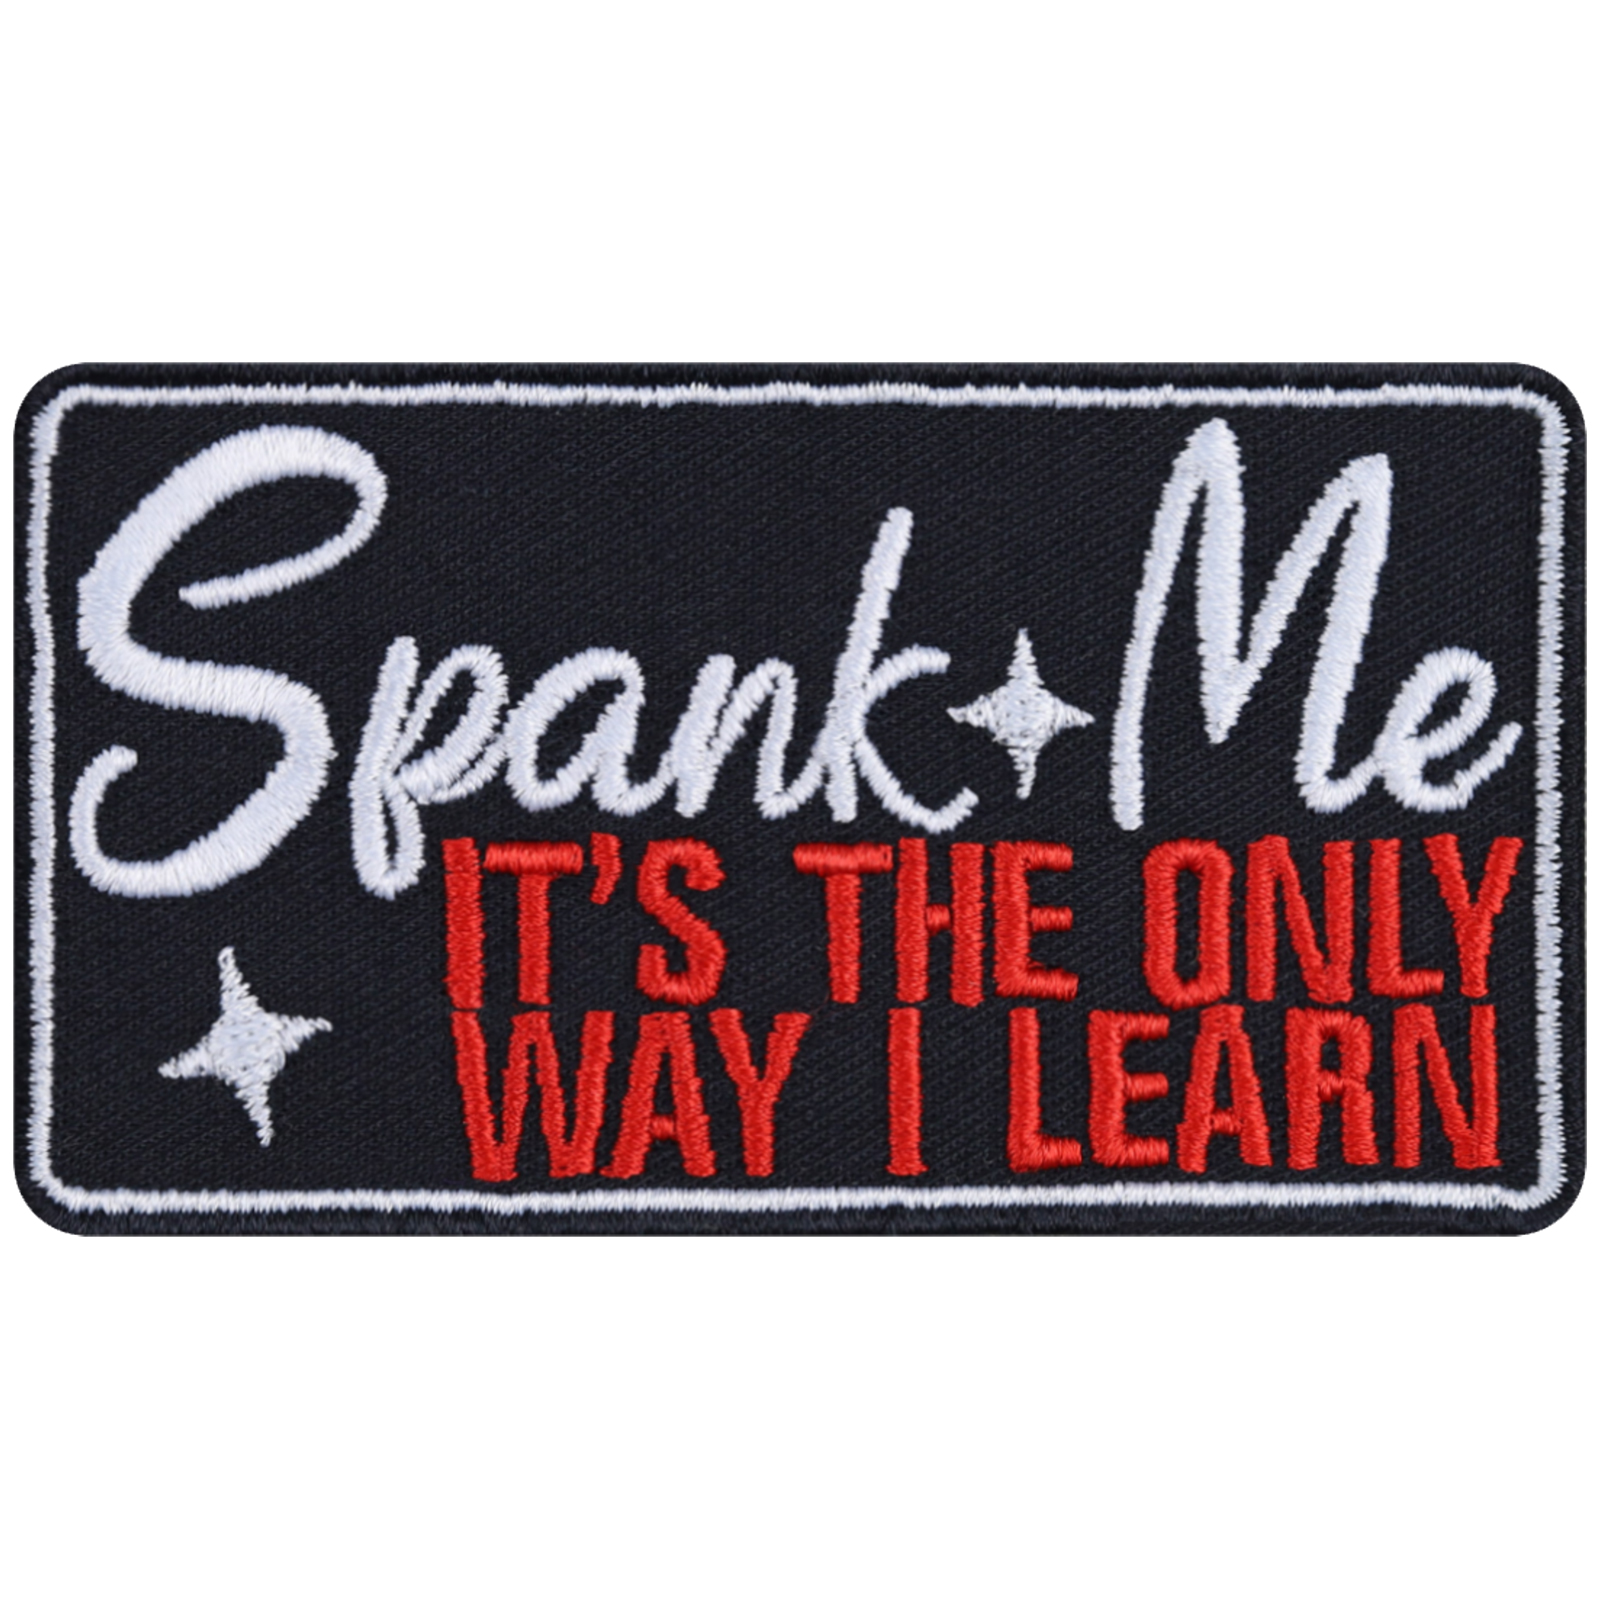 Spank me - It's the only way i learn - Patch